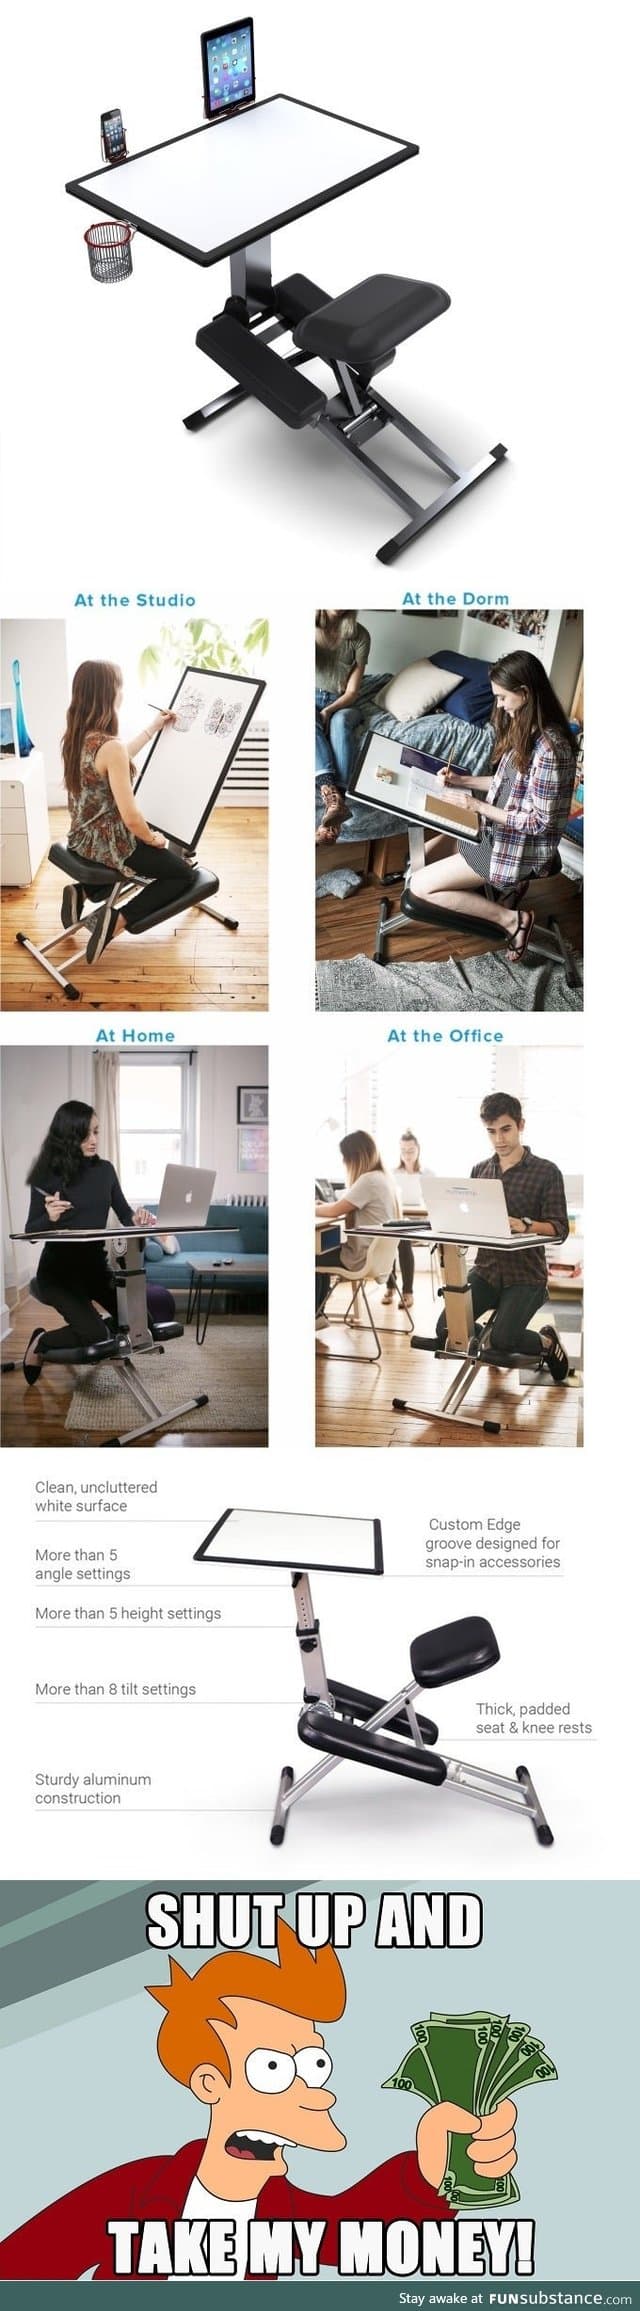 This Portable Desk Design lets You Work Anywhere